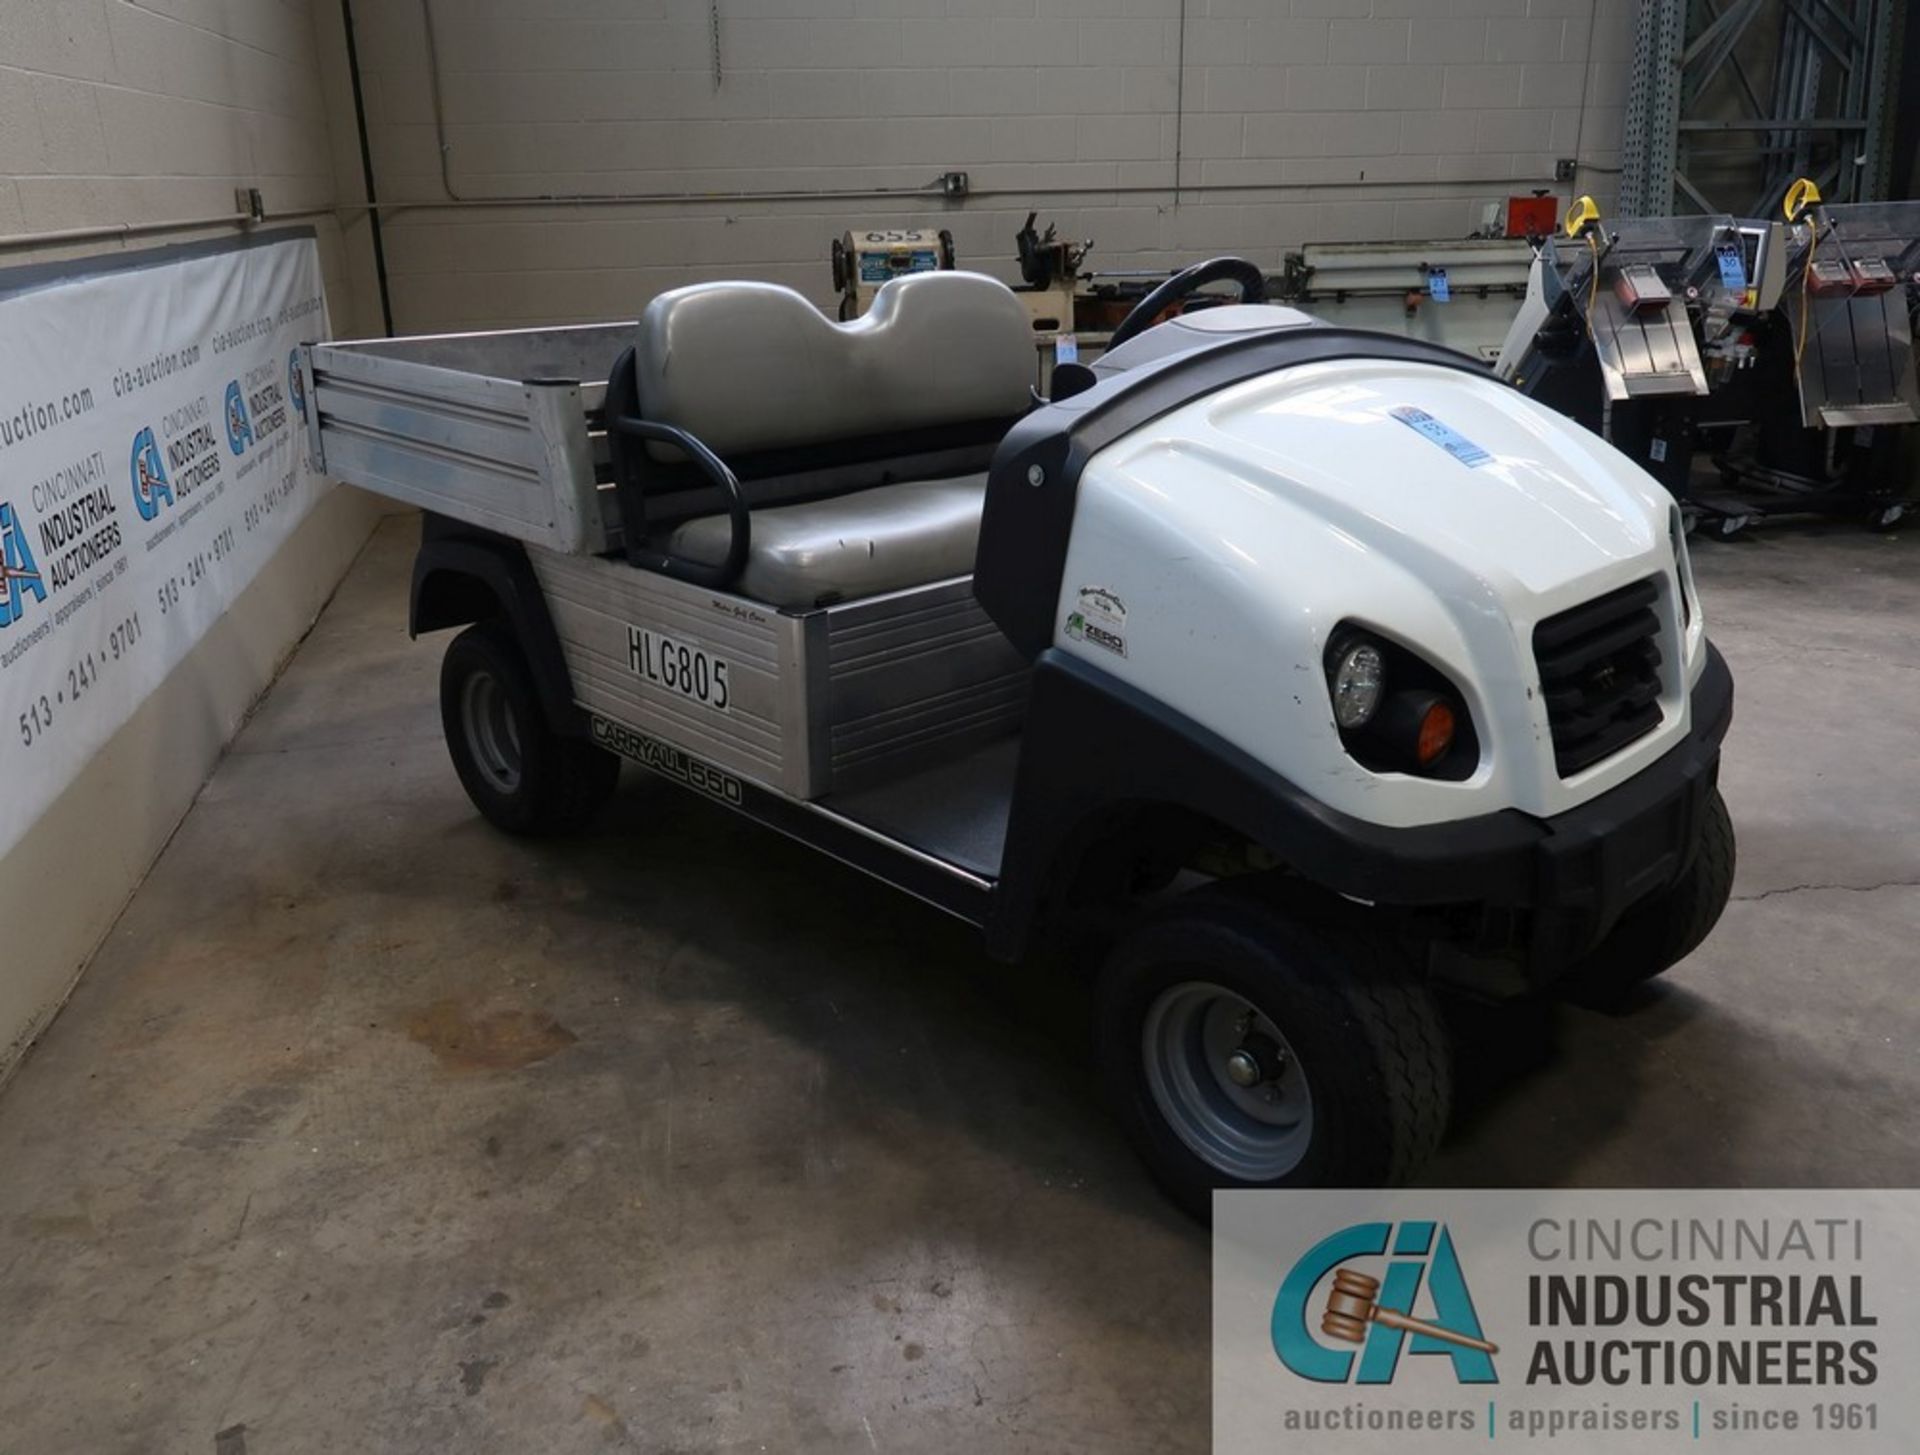 2015 CLUB CAR MODEL CARRYALL 550 ELECTRIC GOLF CART- Needs new batteries - does not run; S/N MM1535 - Image 2 of 13